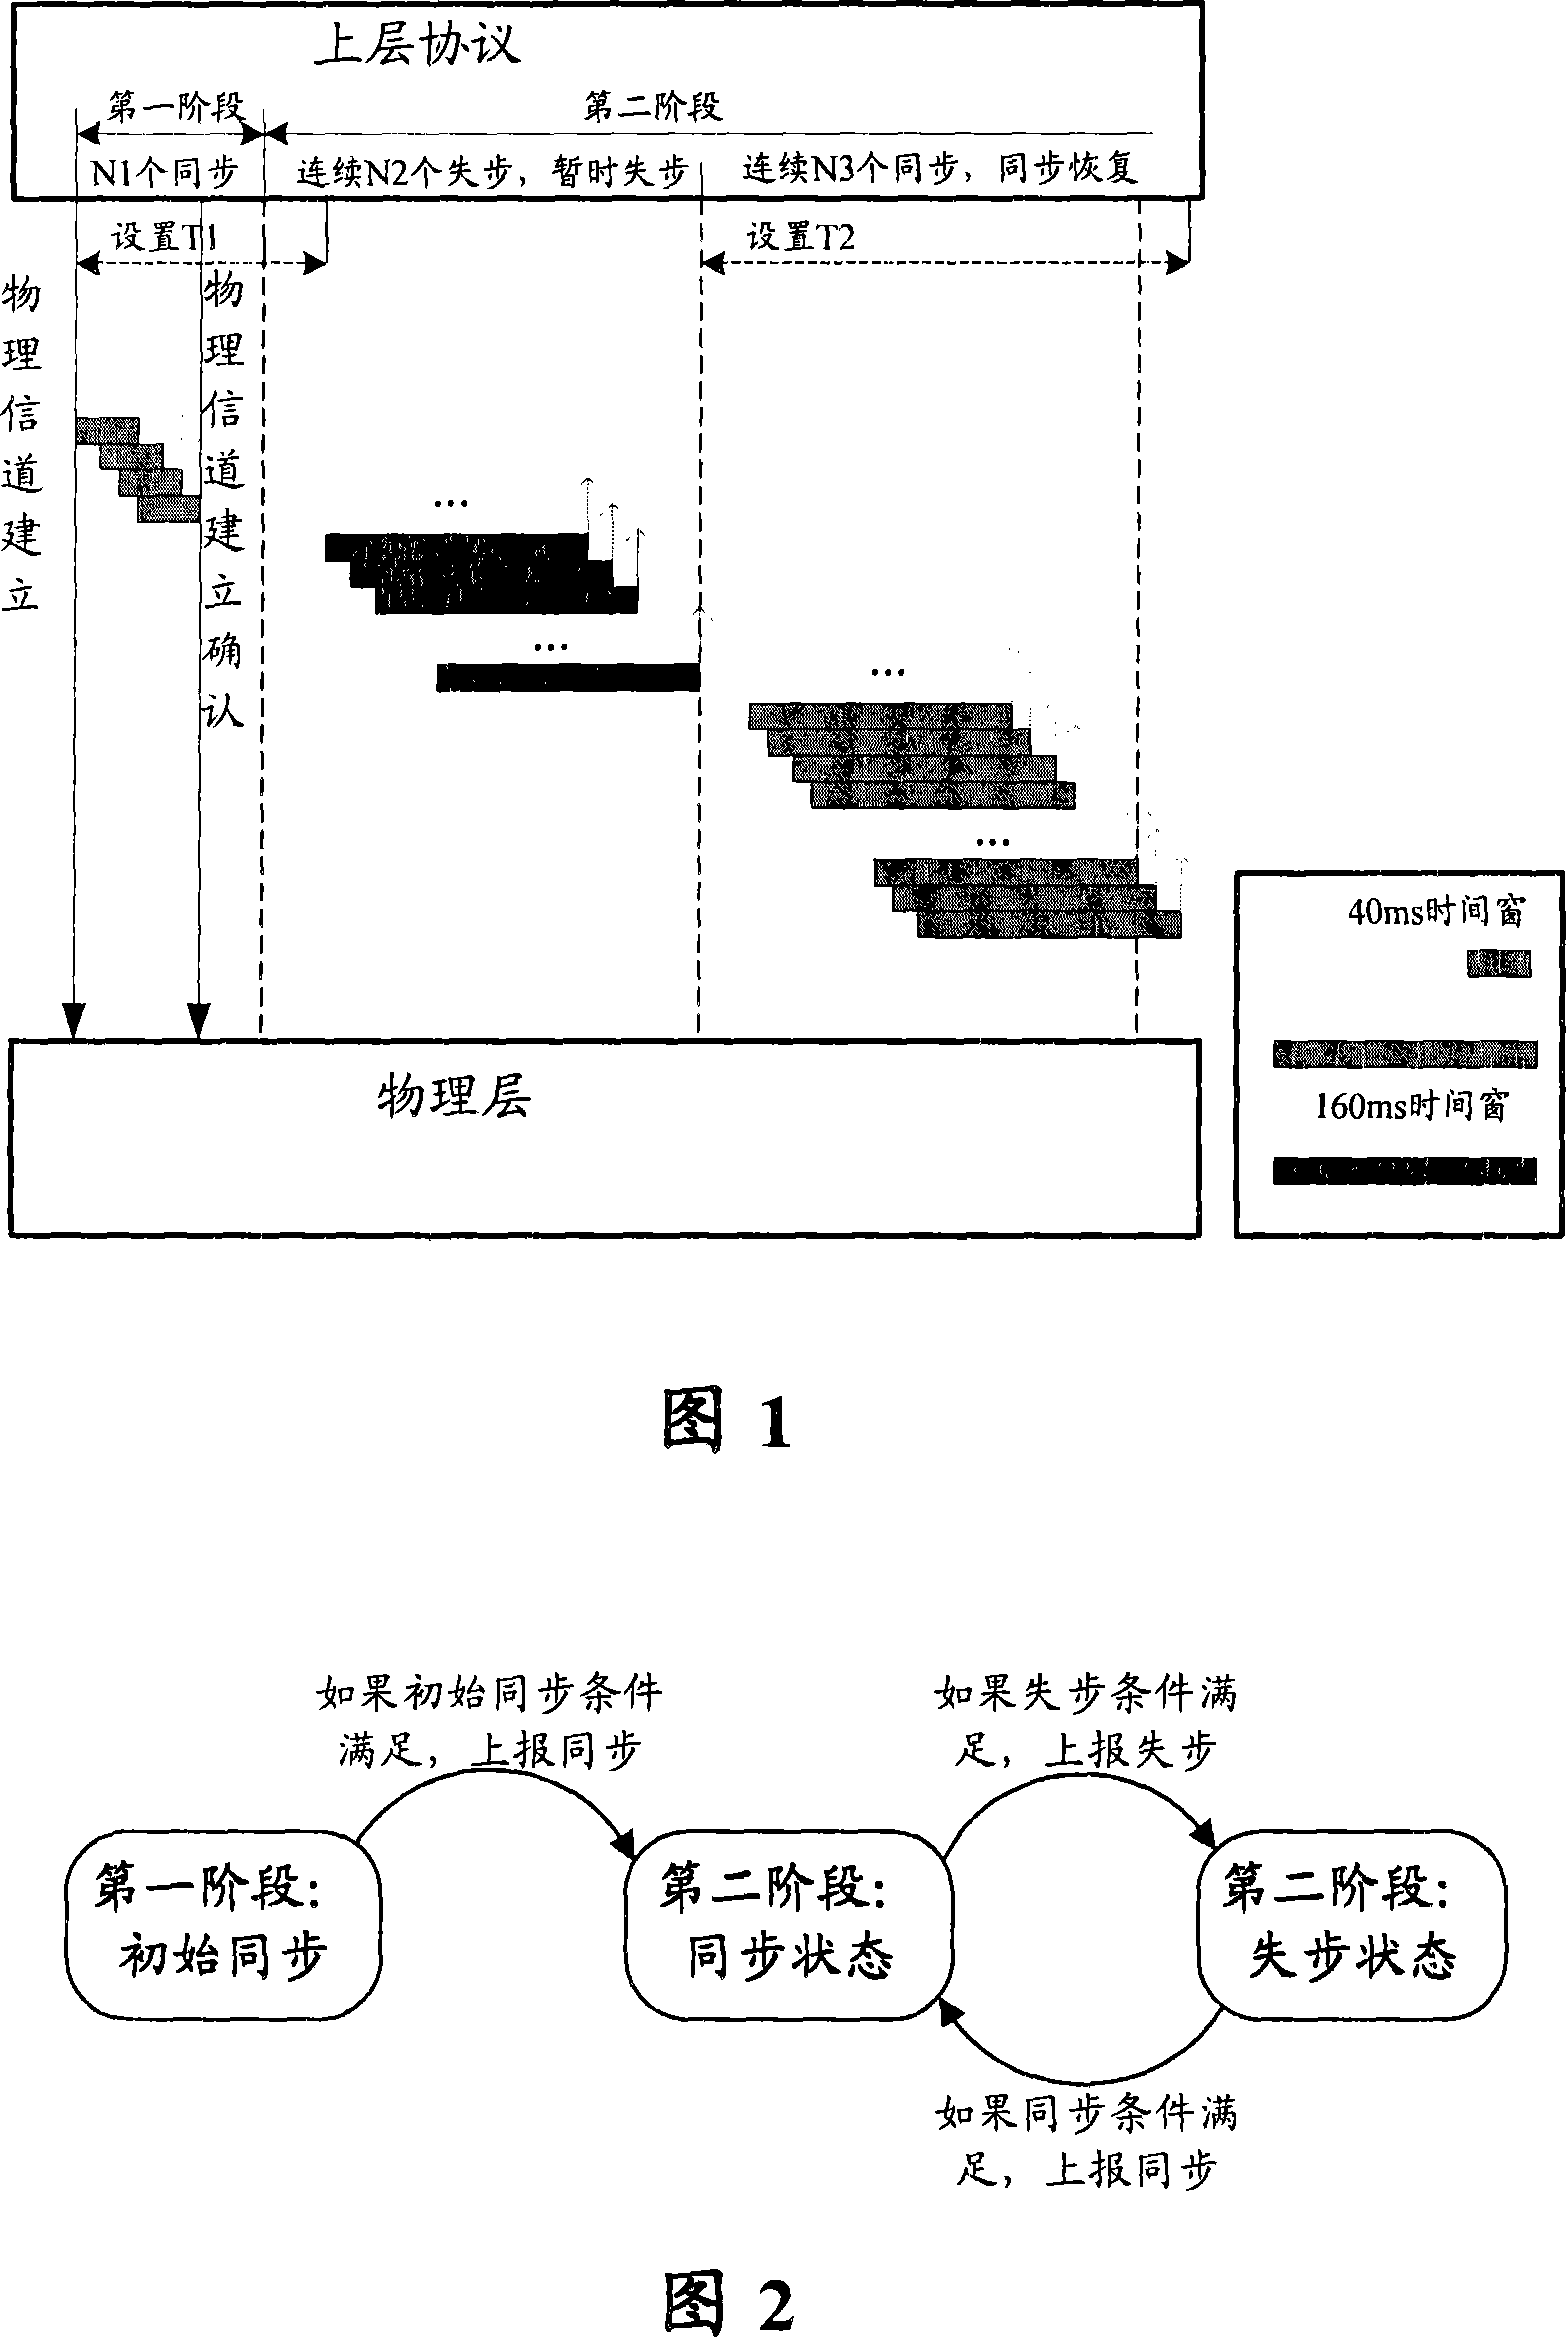 Synchronizing or desynchronizing state reporting method of physical layer downlink